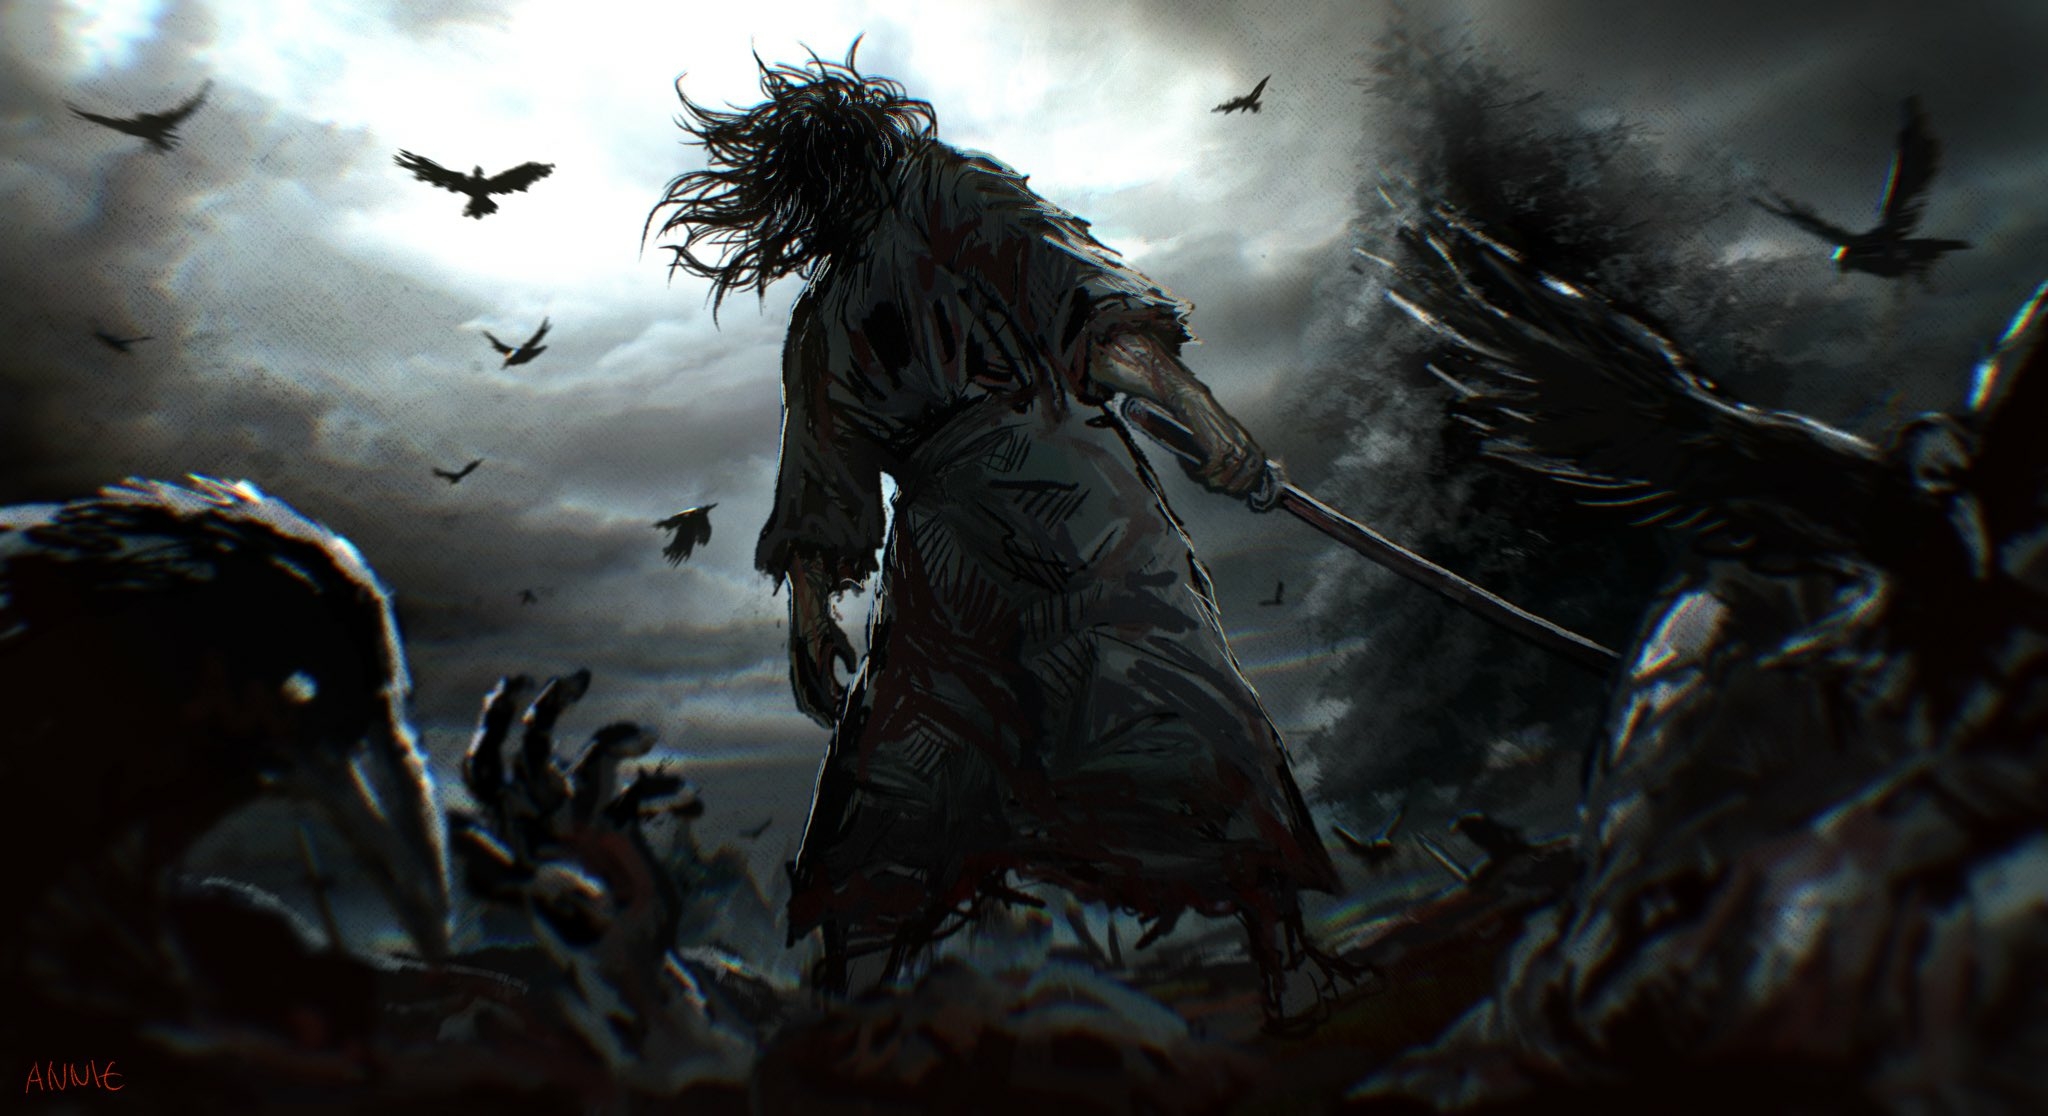 VAGABOND wallpaper by Ryuukow  Download on ZEDGE  062a